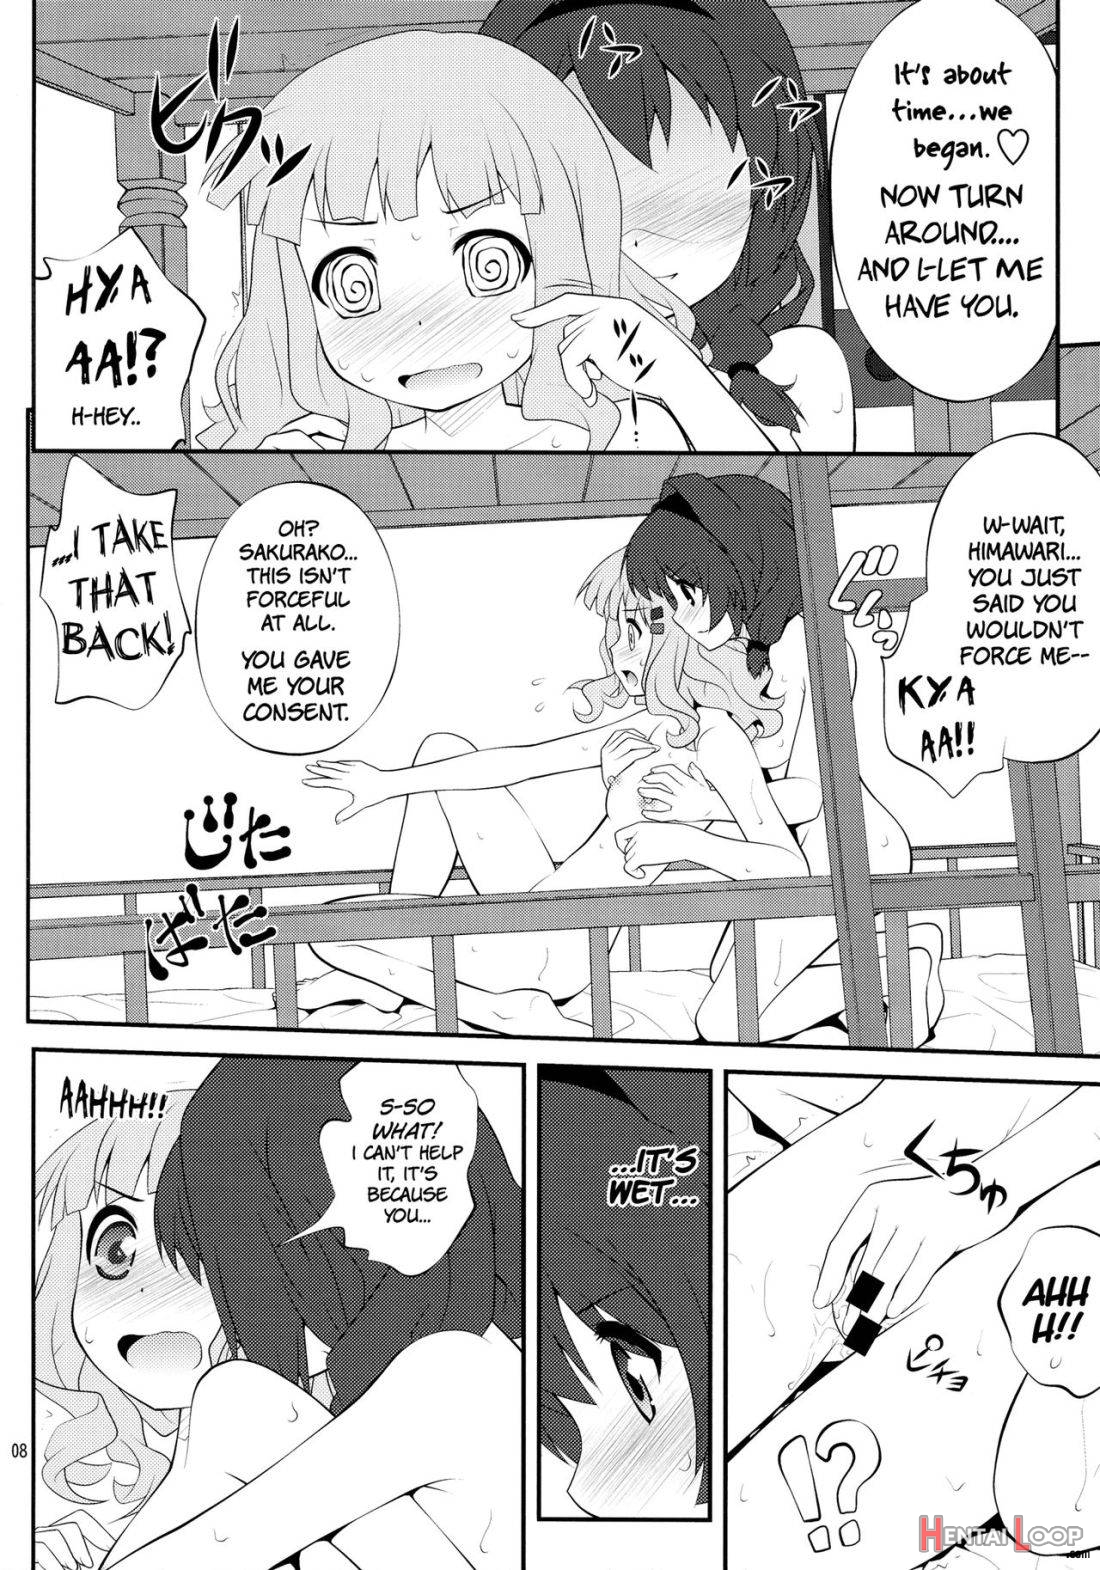 Himegoto Flowers 3 page 7